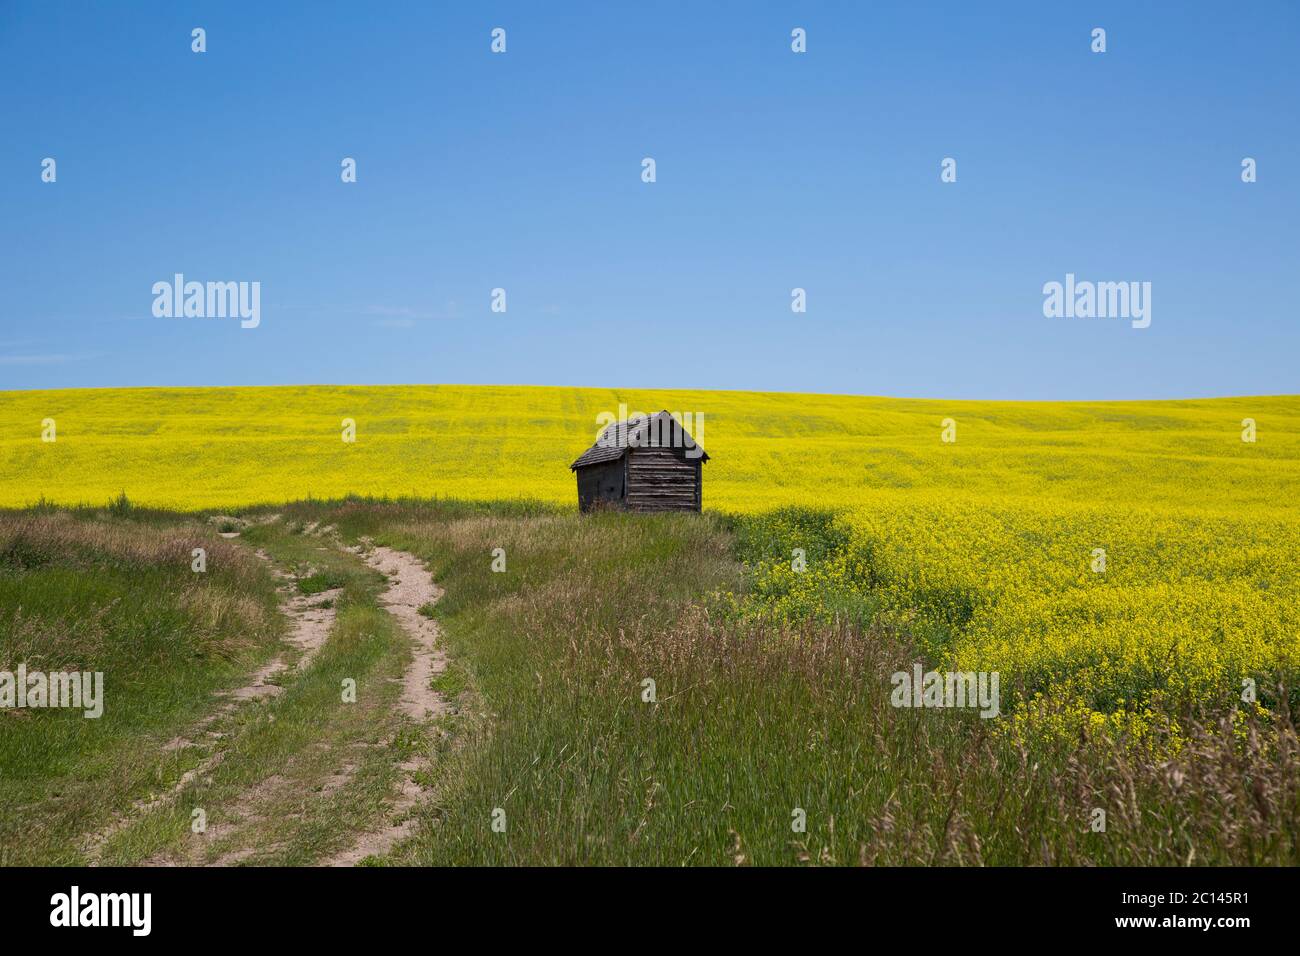 A Field of yellow flowers of canola plant on a bright sunny day Stock Photo